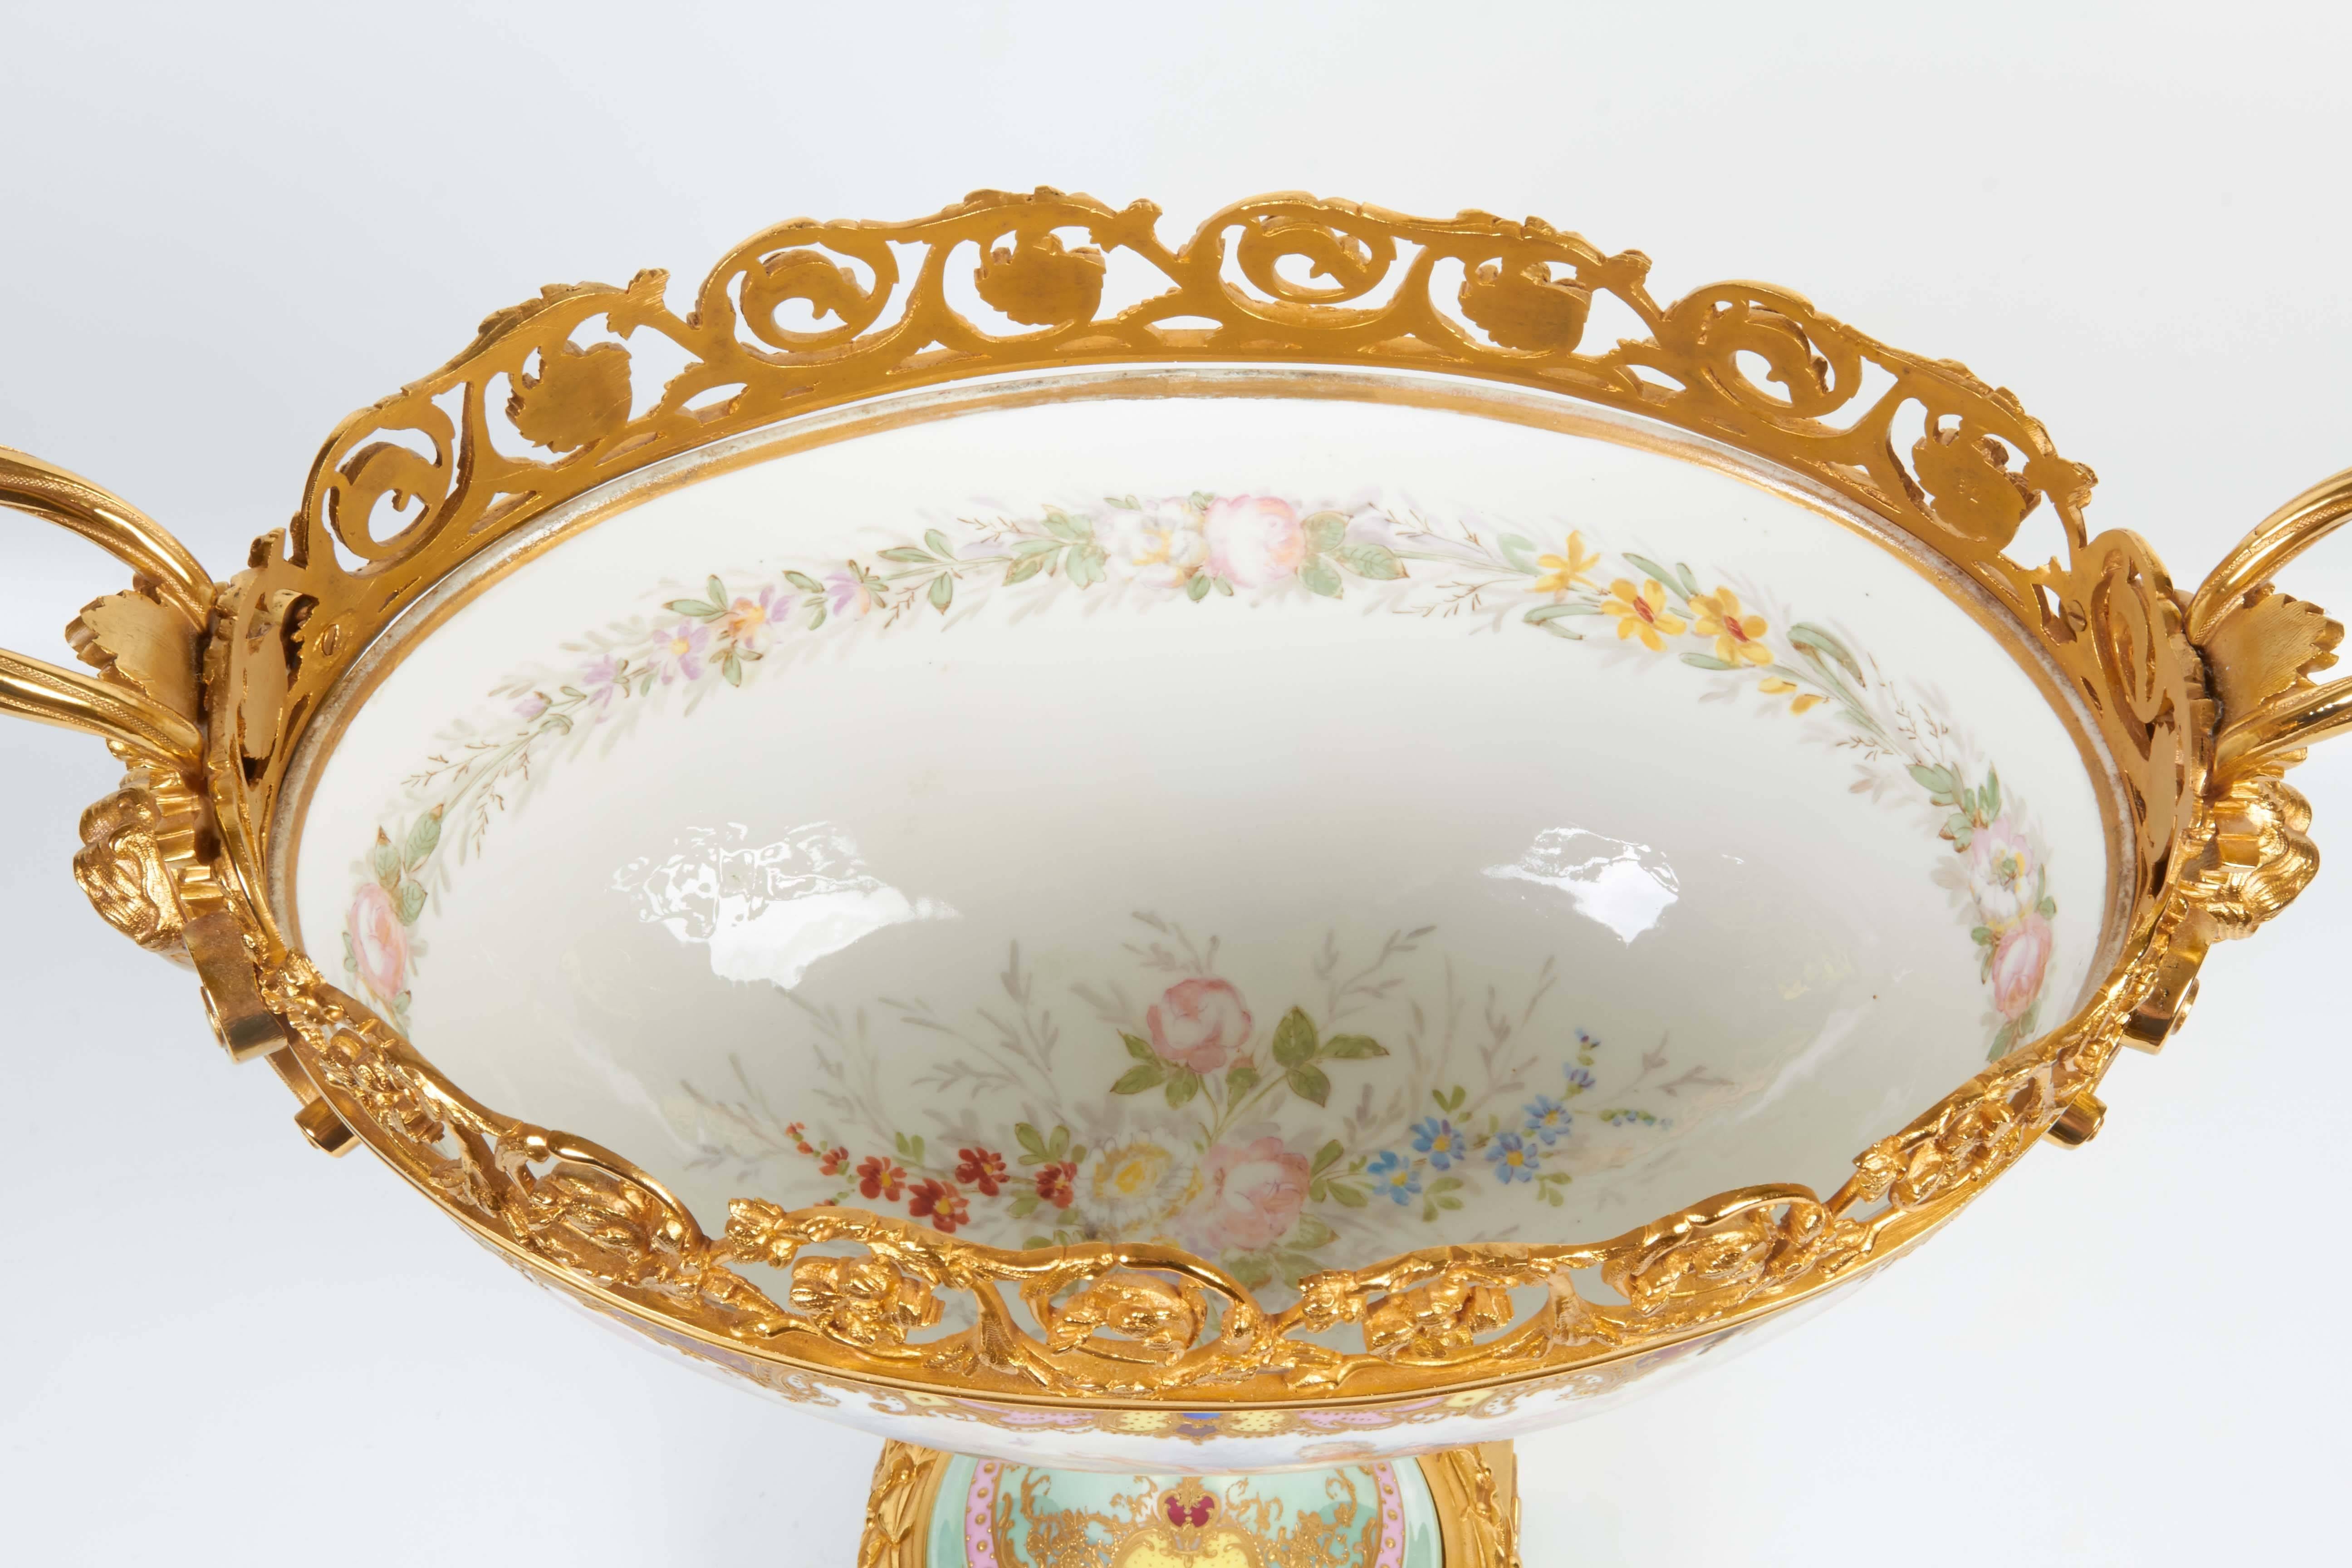 French Sèvres Porcelain & Ormolu-Mounted Hand-Painted Oval Centerpiece/Jardenier For Sale 1